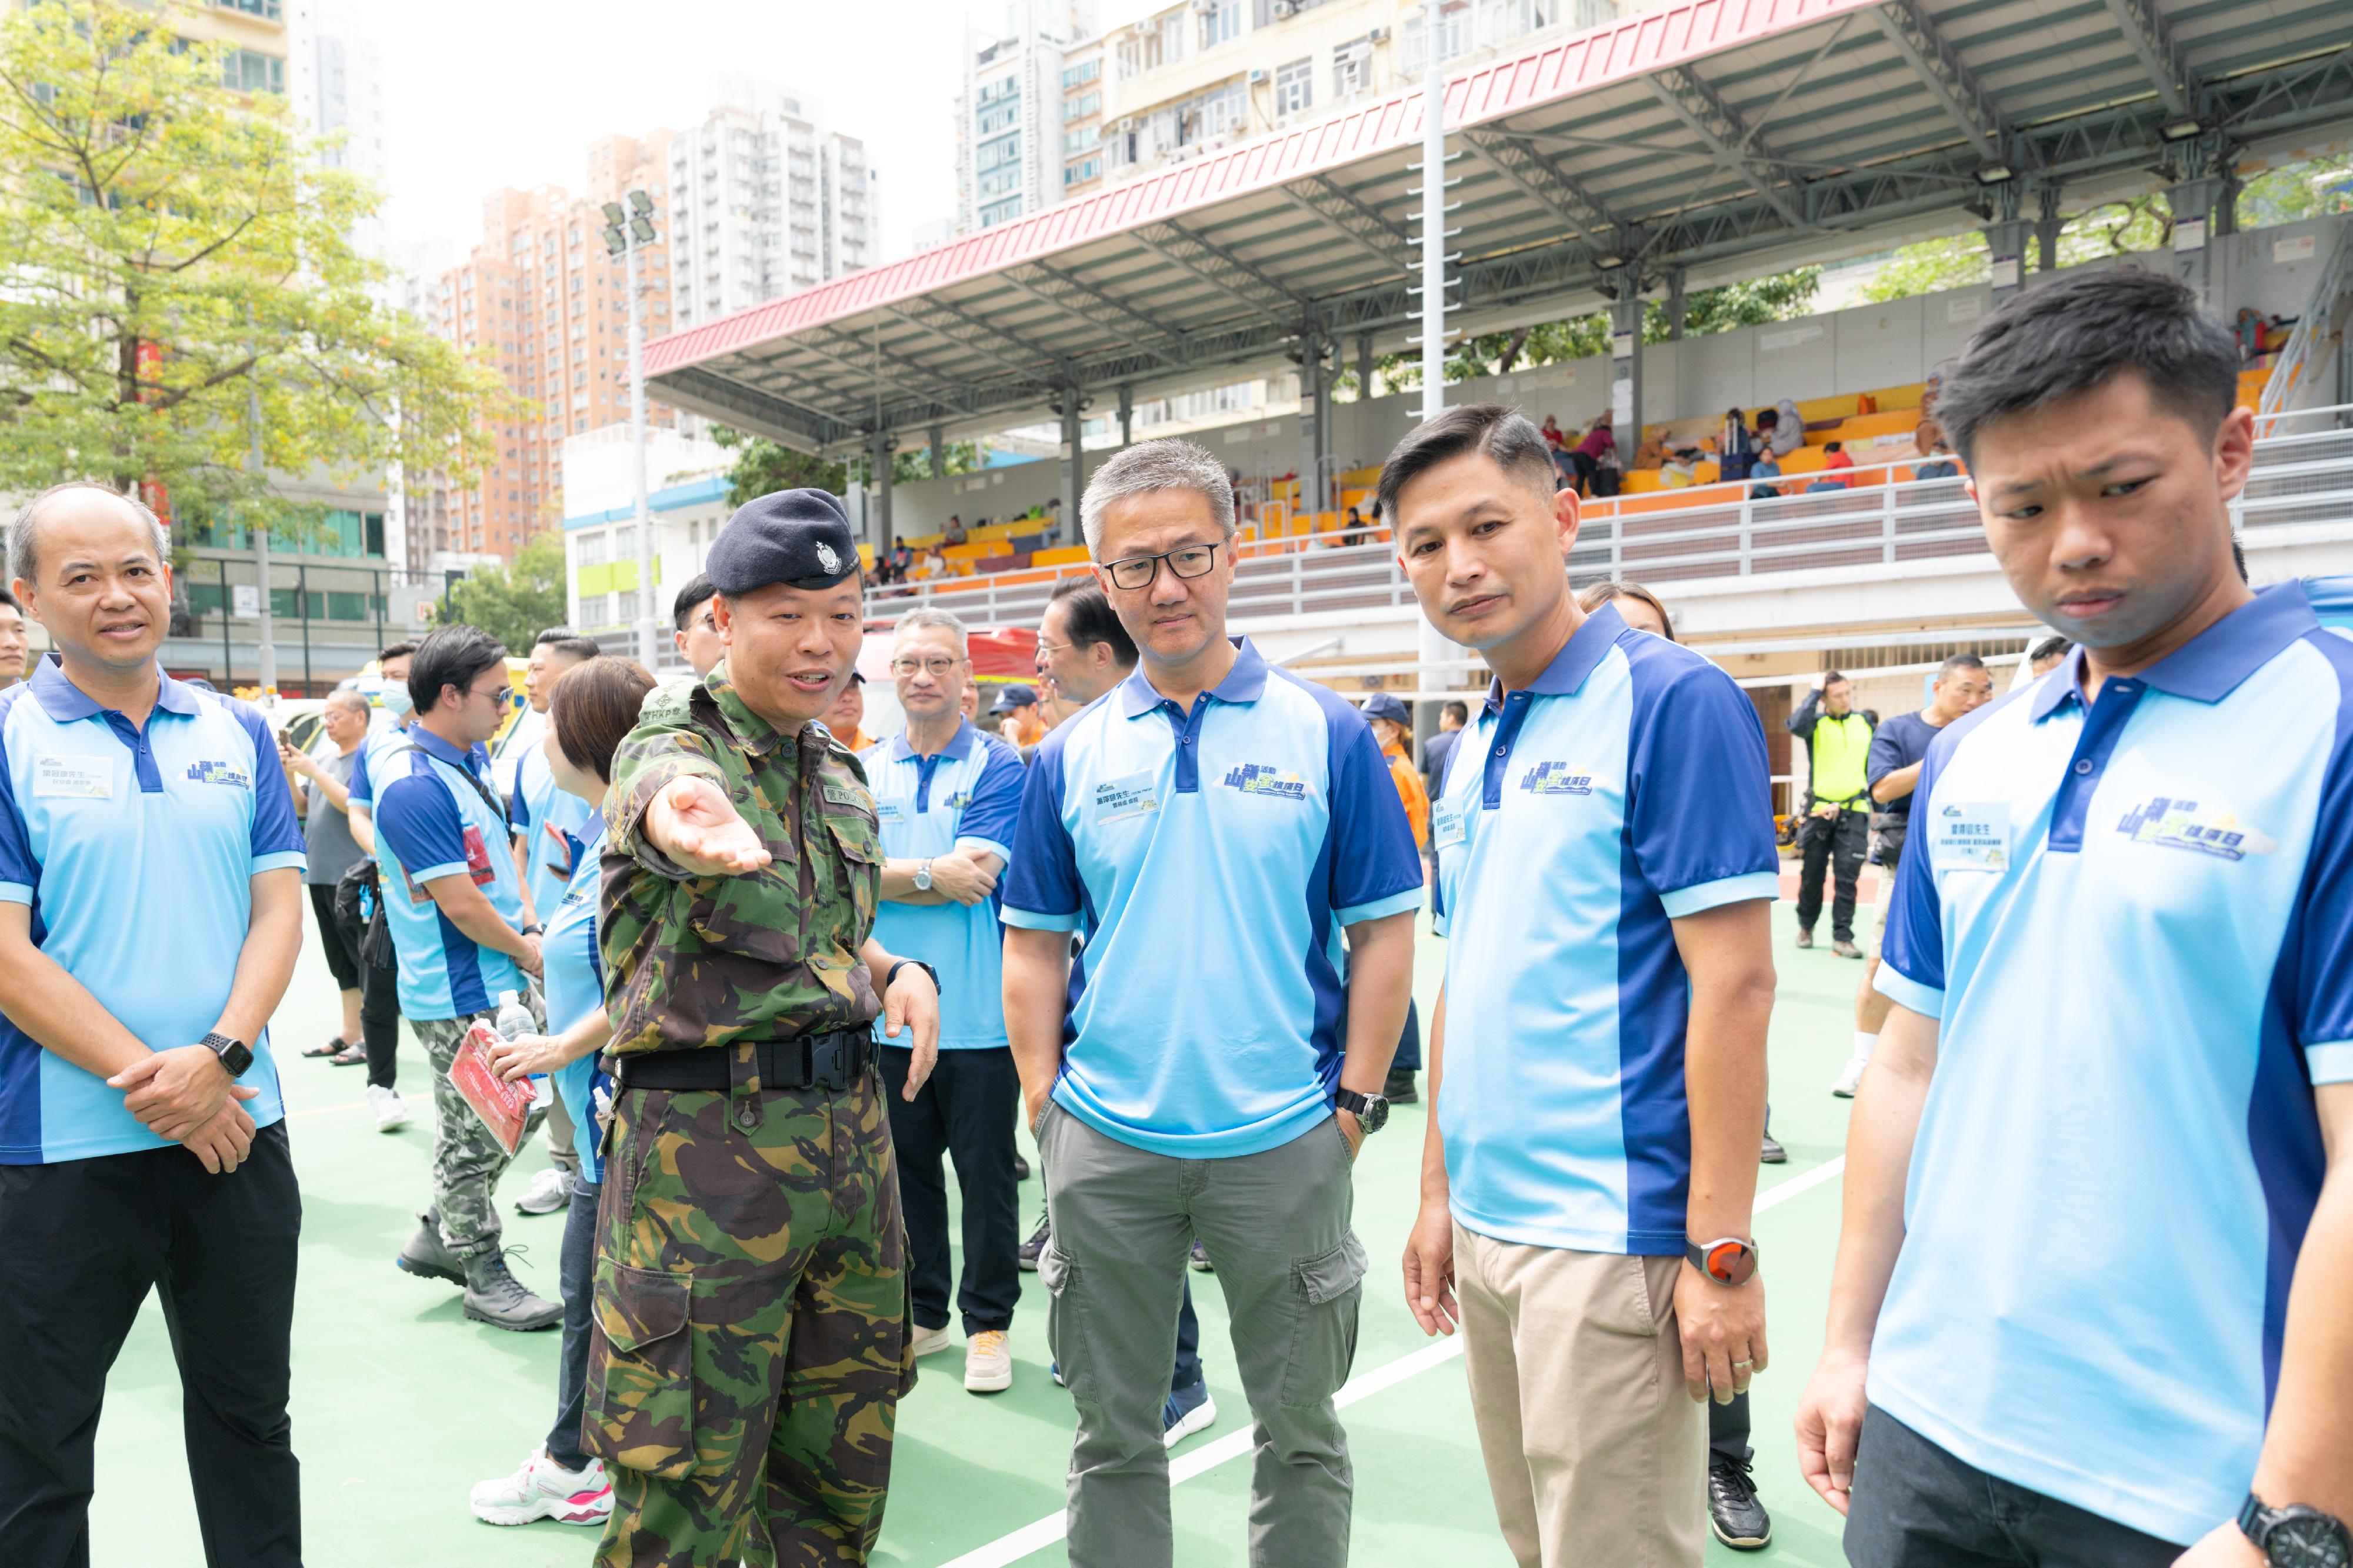 The Civil Aid Service (CAS) held the Mountain Safety Promotion Day with various government departments and mountaineering organisations today (October 22) at MacPherson Playground. Photo shows officiating guests visiting display booths.